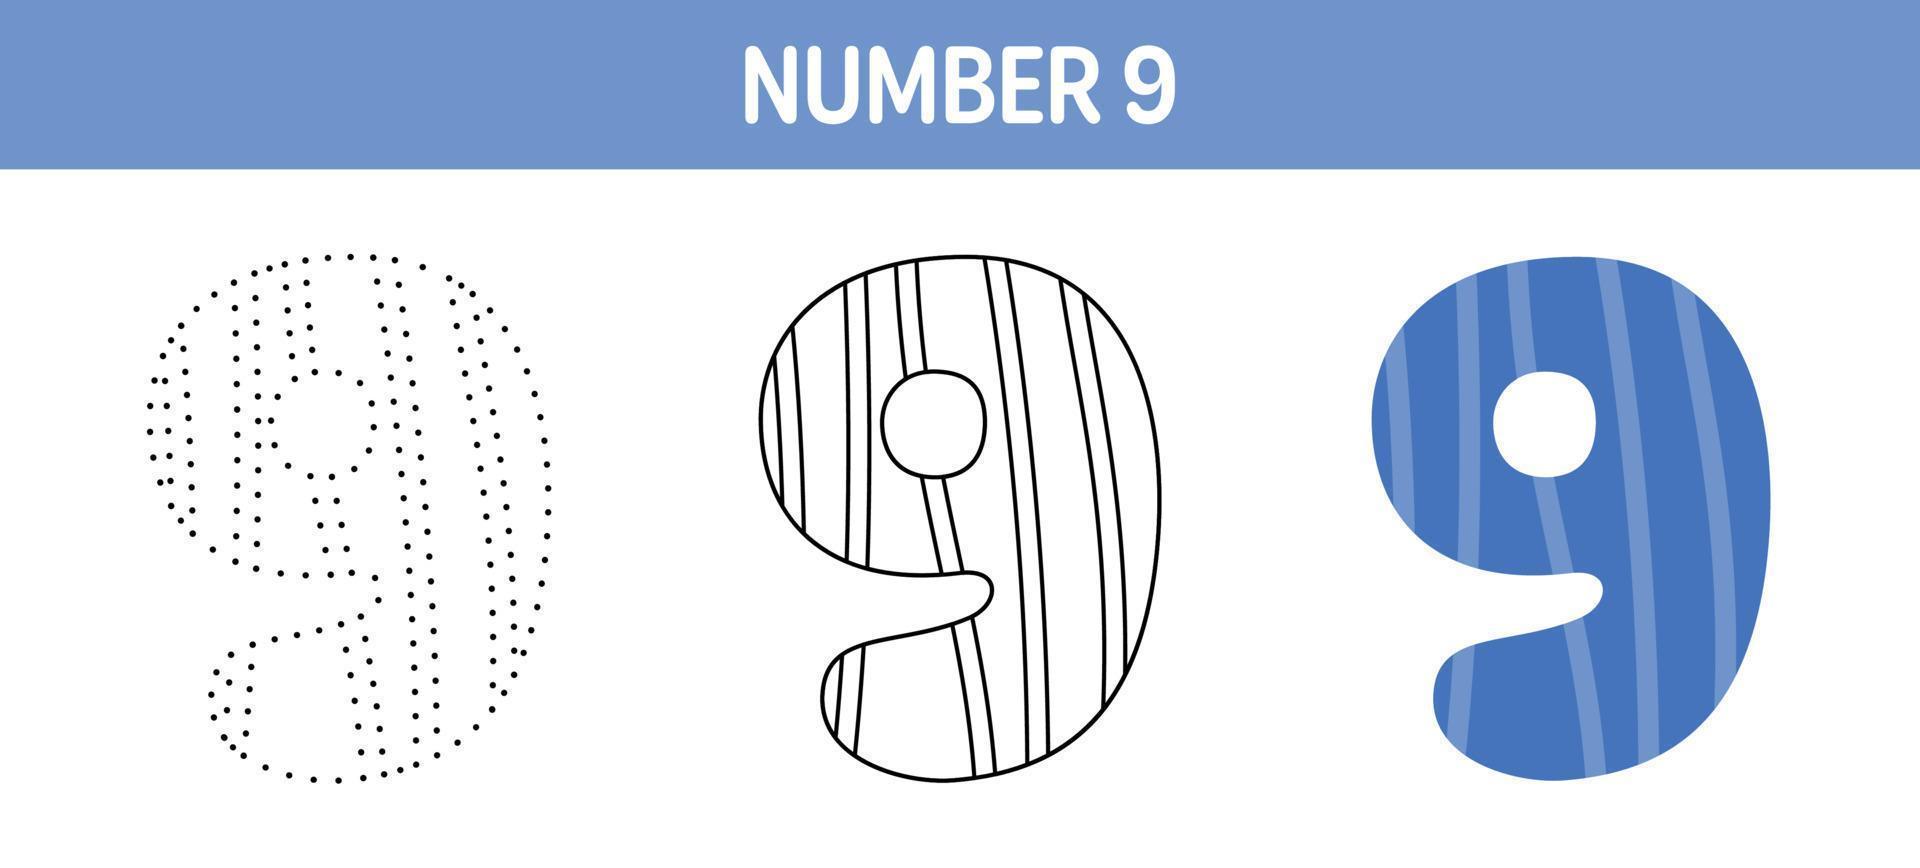 Number 9 tracing and coloring worksheet for kids vector